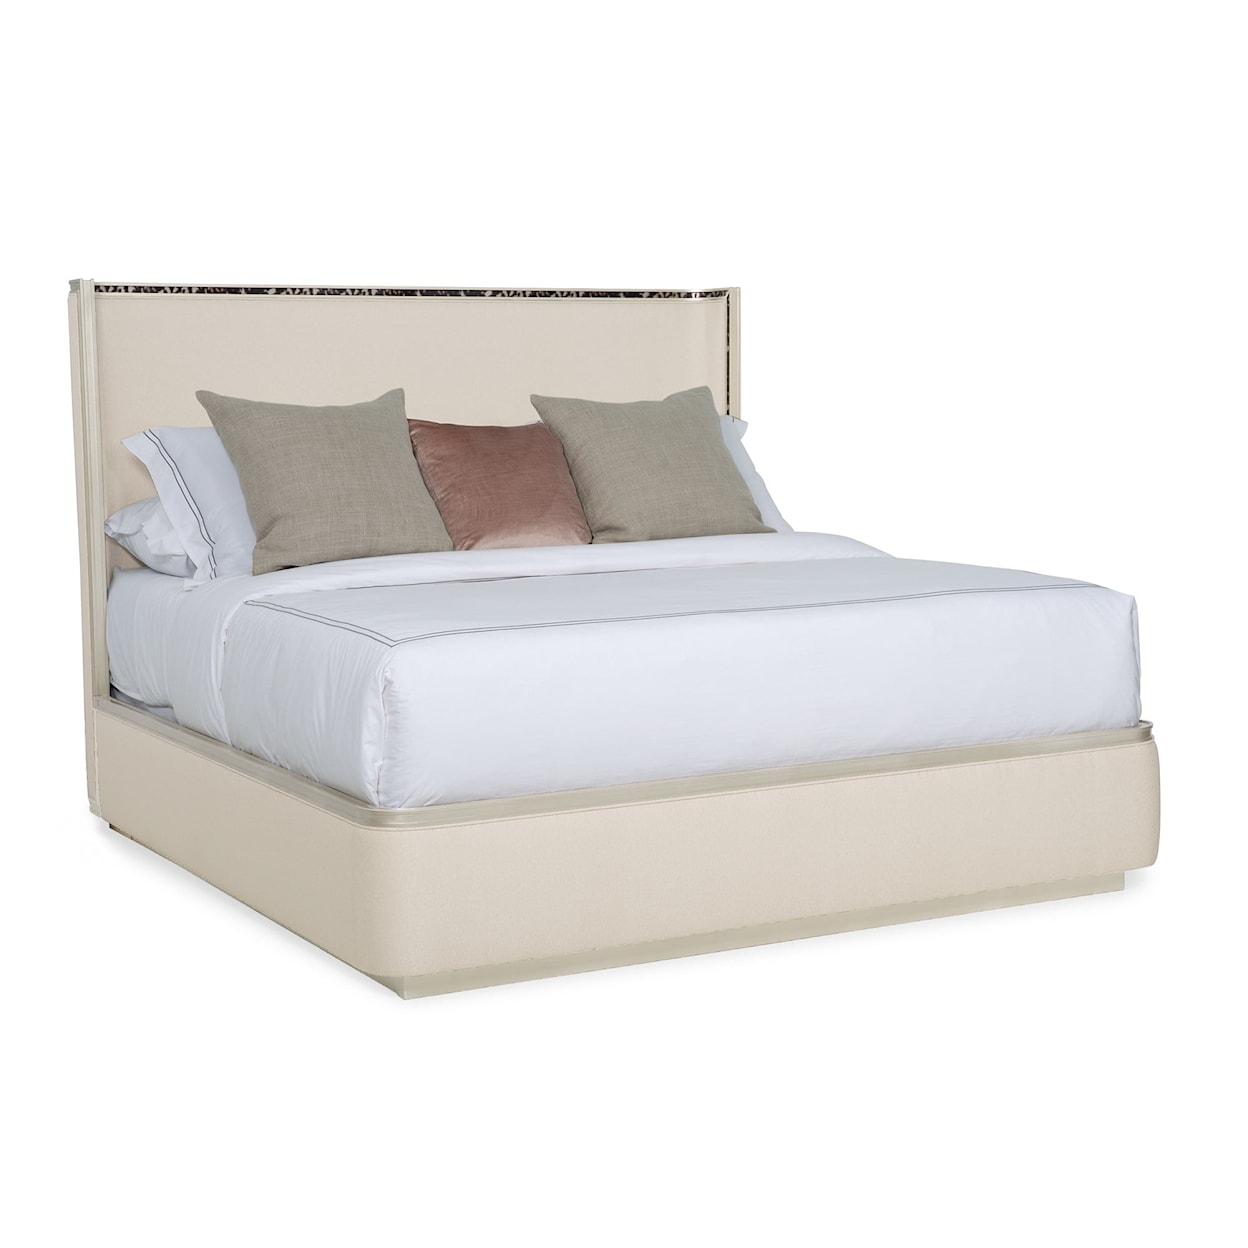 Caracole Caracole Classic Dream Big King Bed